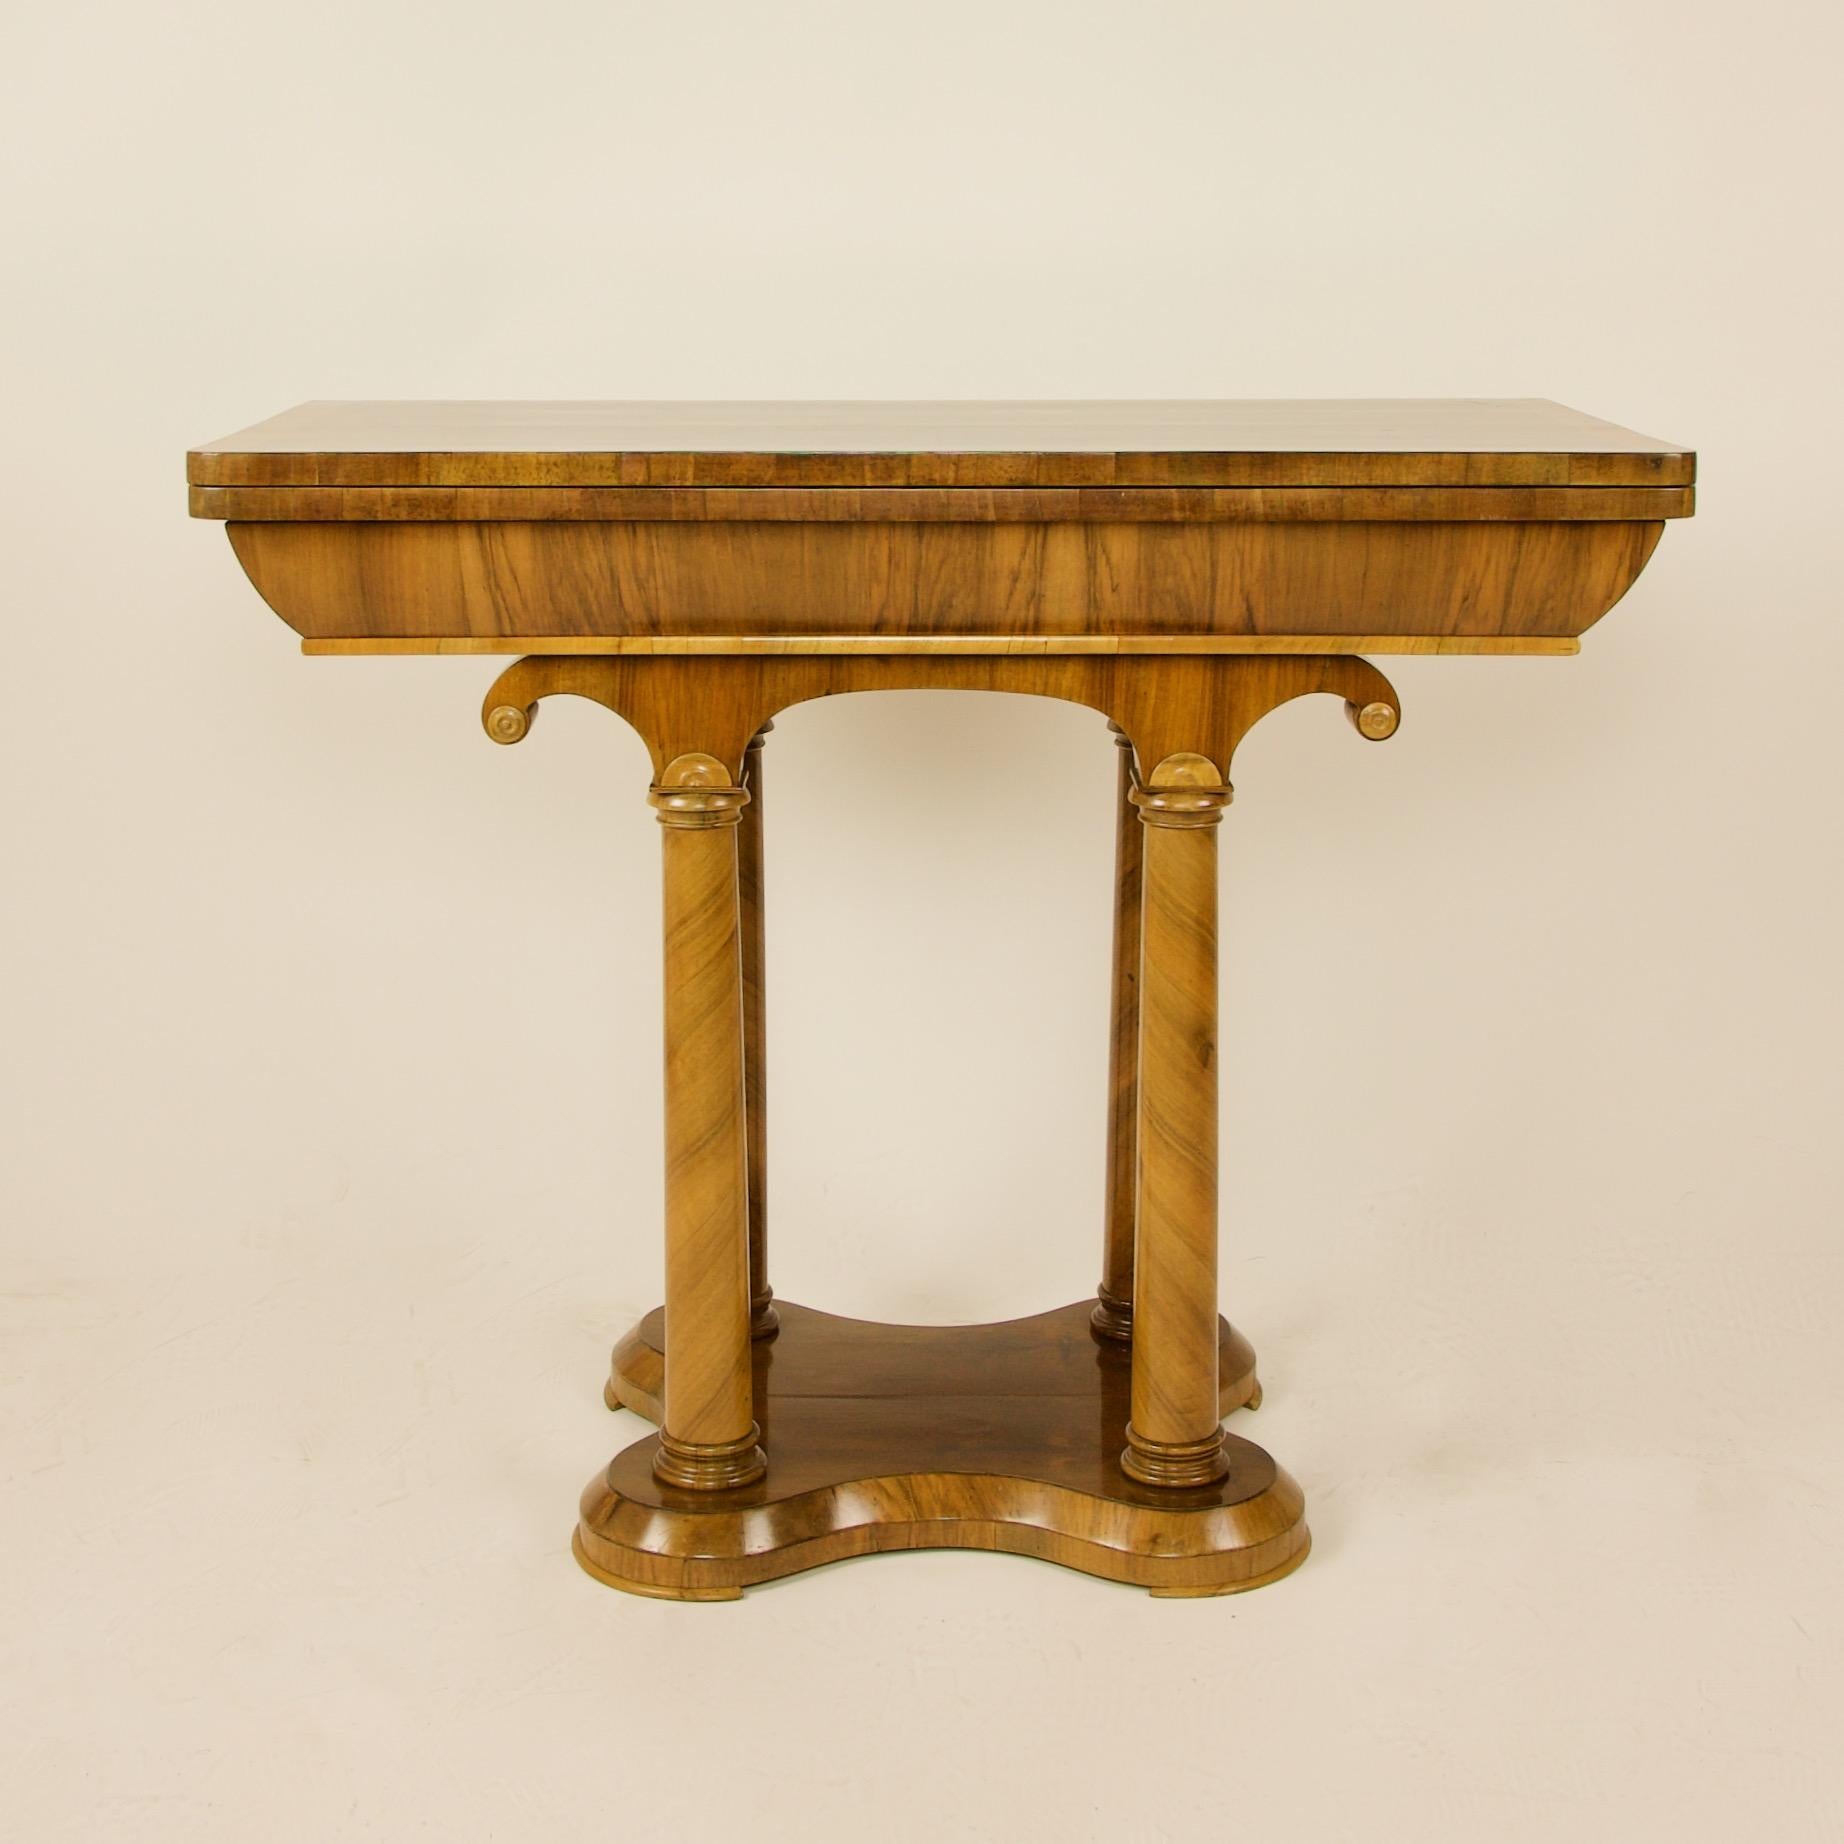 Austrian/Vienna 1st half of 19th century Biedermeier walnut game flip flop top table, ca. 1840:

A Biedermeier extending game table made of walnut veneer with four column shaped tapering legs on a four lobed base. The legs being topped by two arch